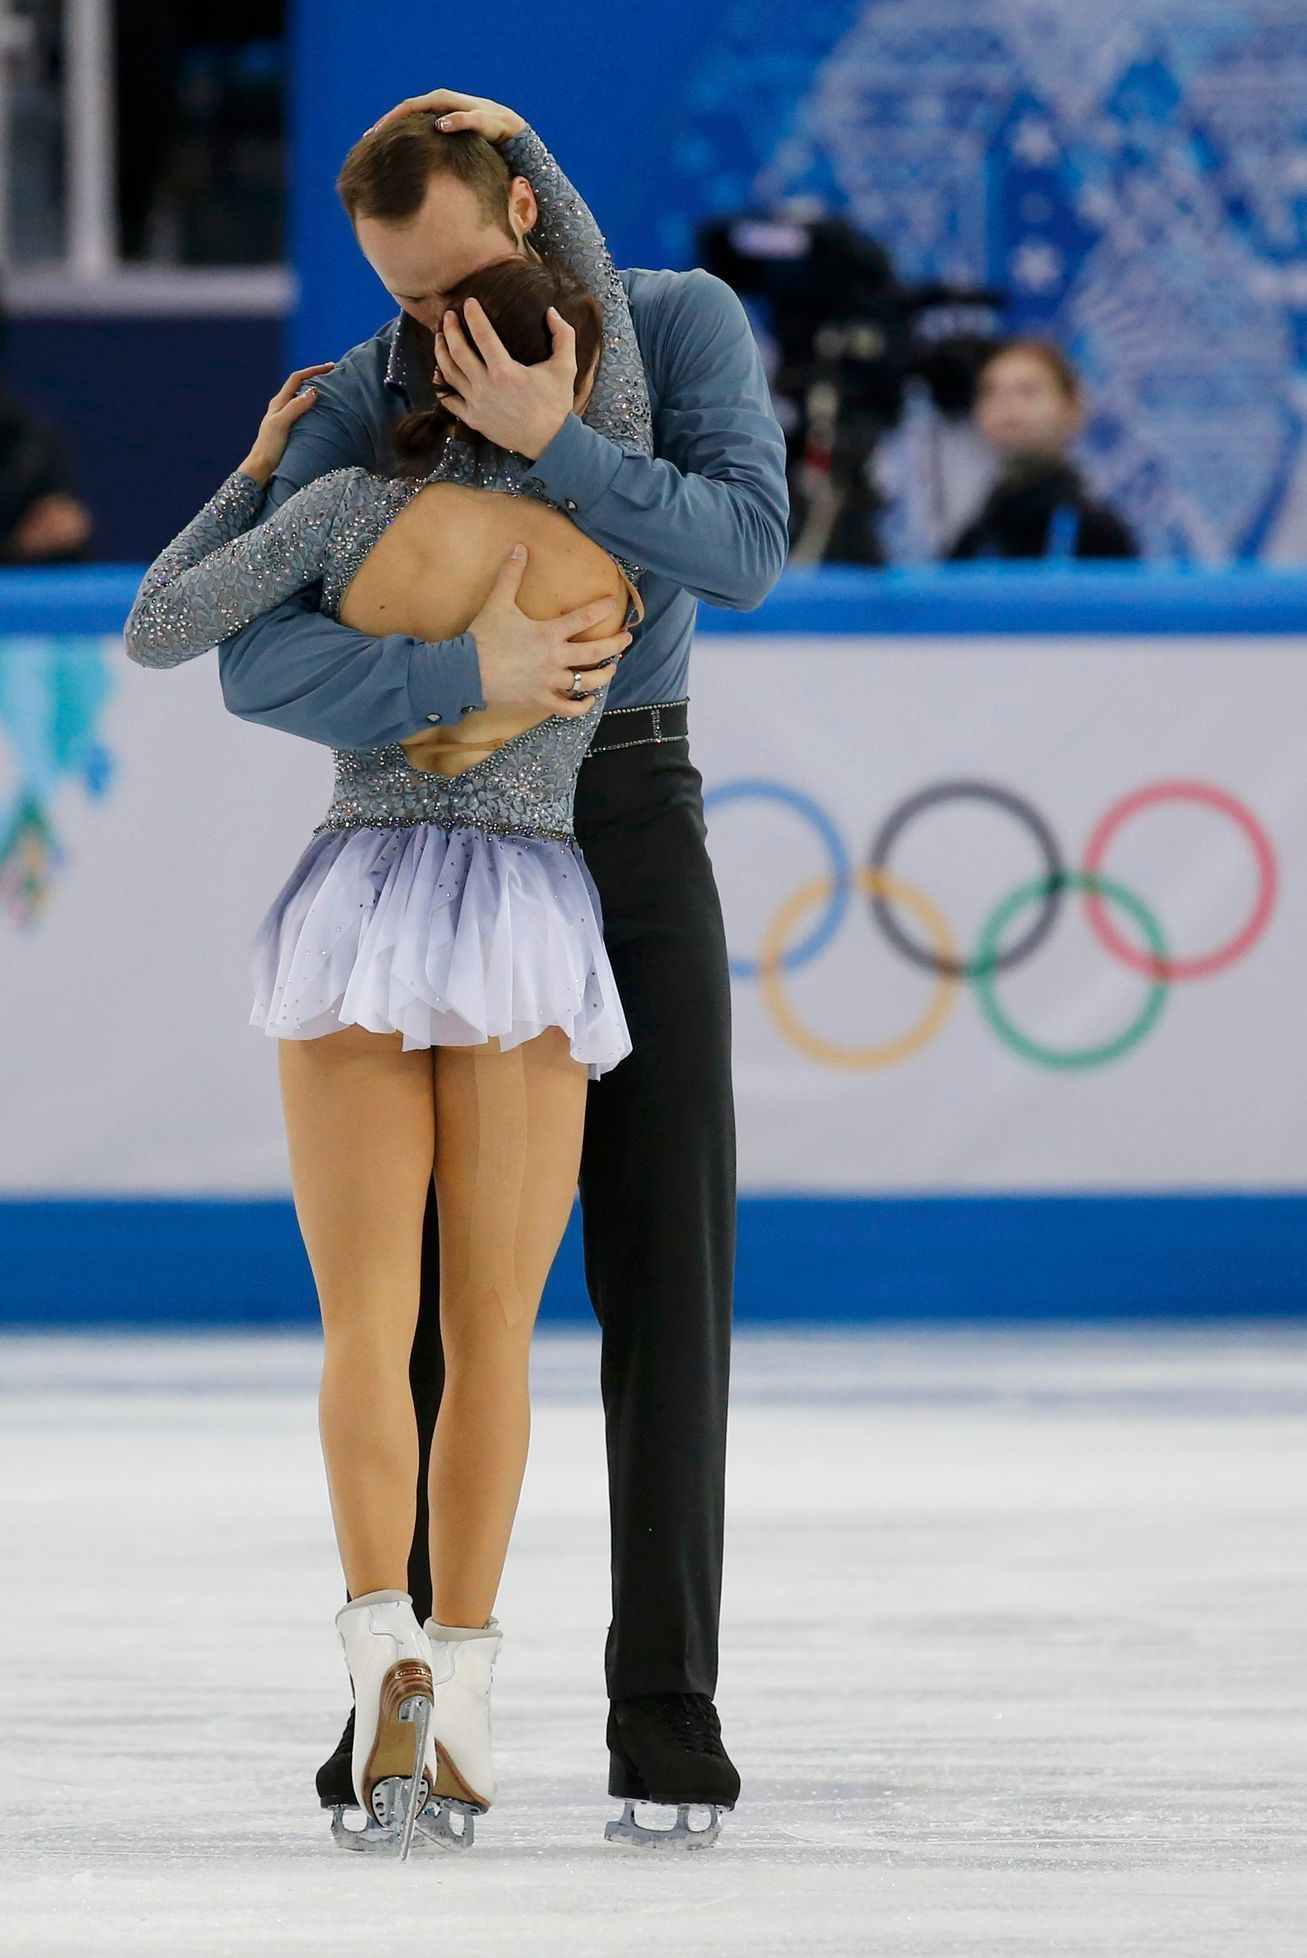 Daniel Wende and Maylin Wende of Germany embrace at the end of their performance during the Team Pairs Short Program at the Sochi 2014 Winter Olympics